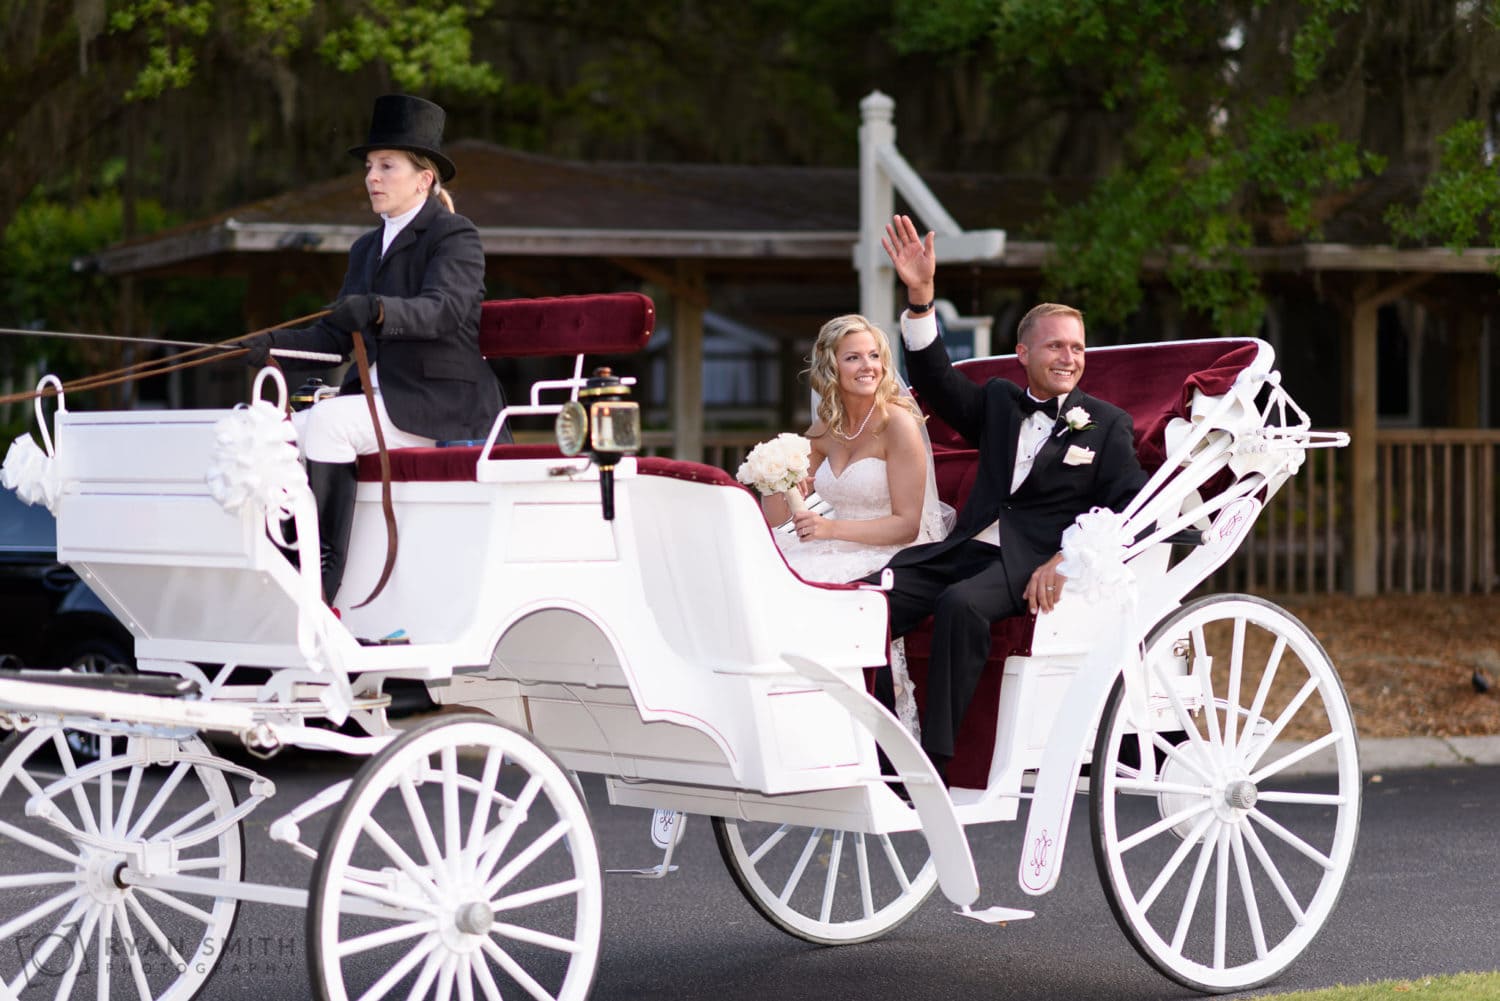 Leaving ceremony on carriage - Wachesaw Plantation